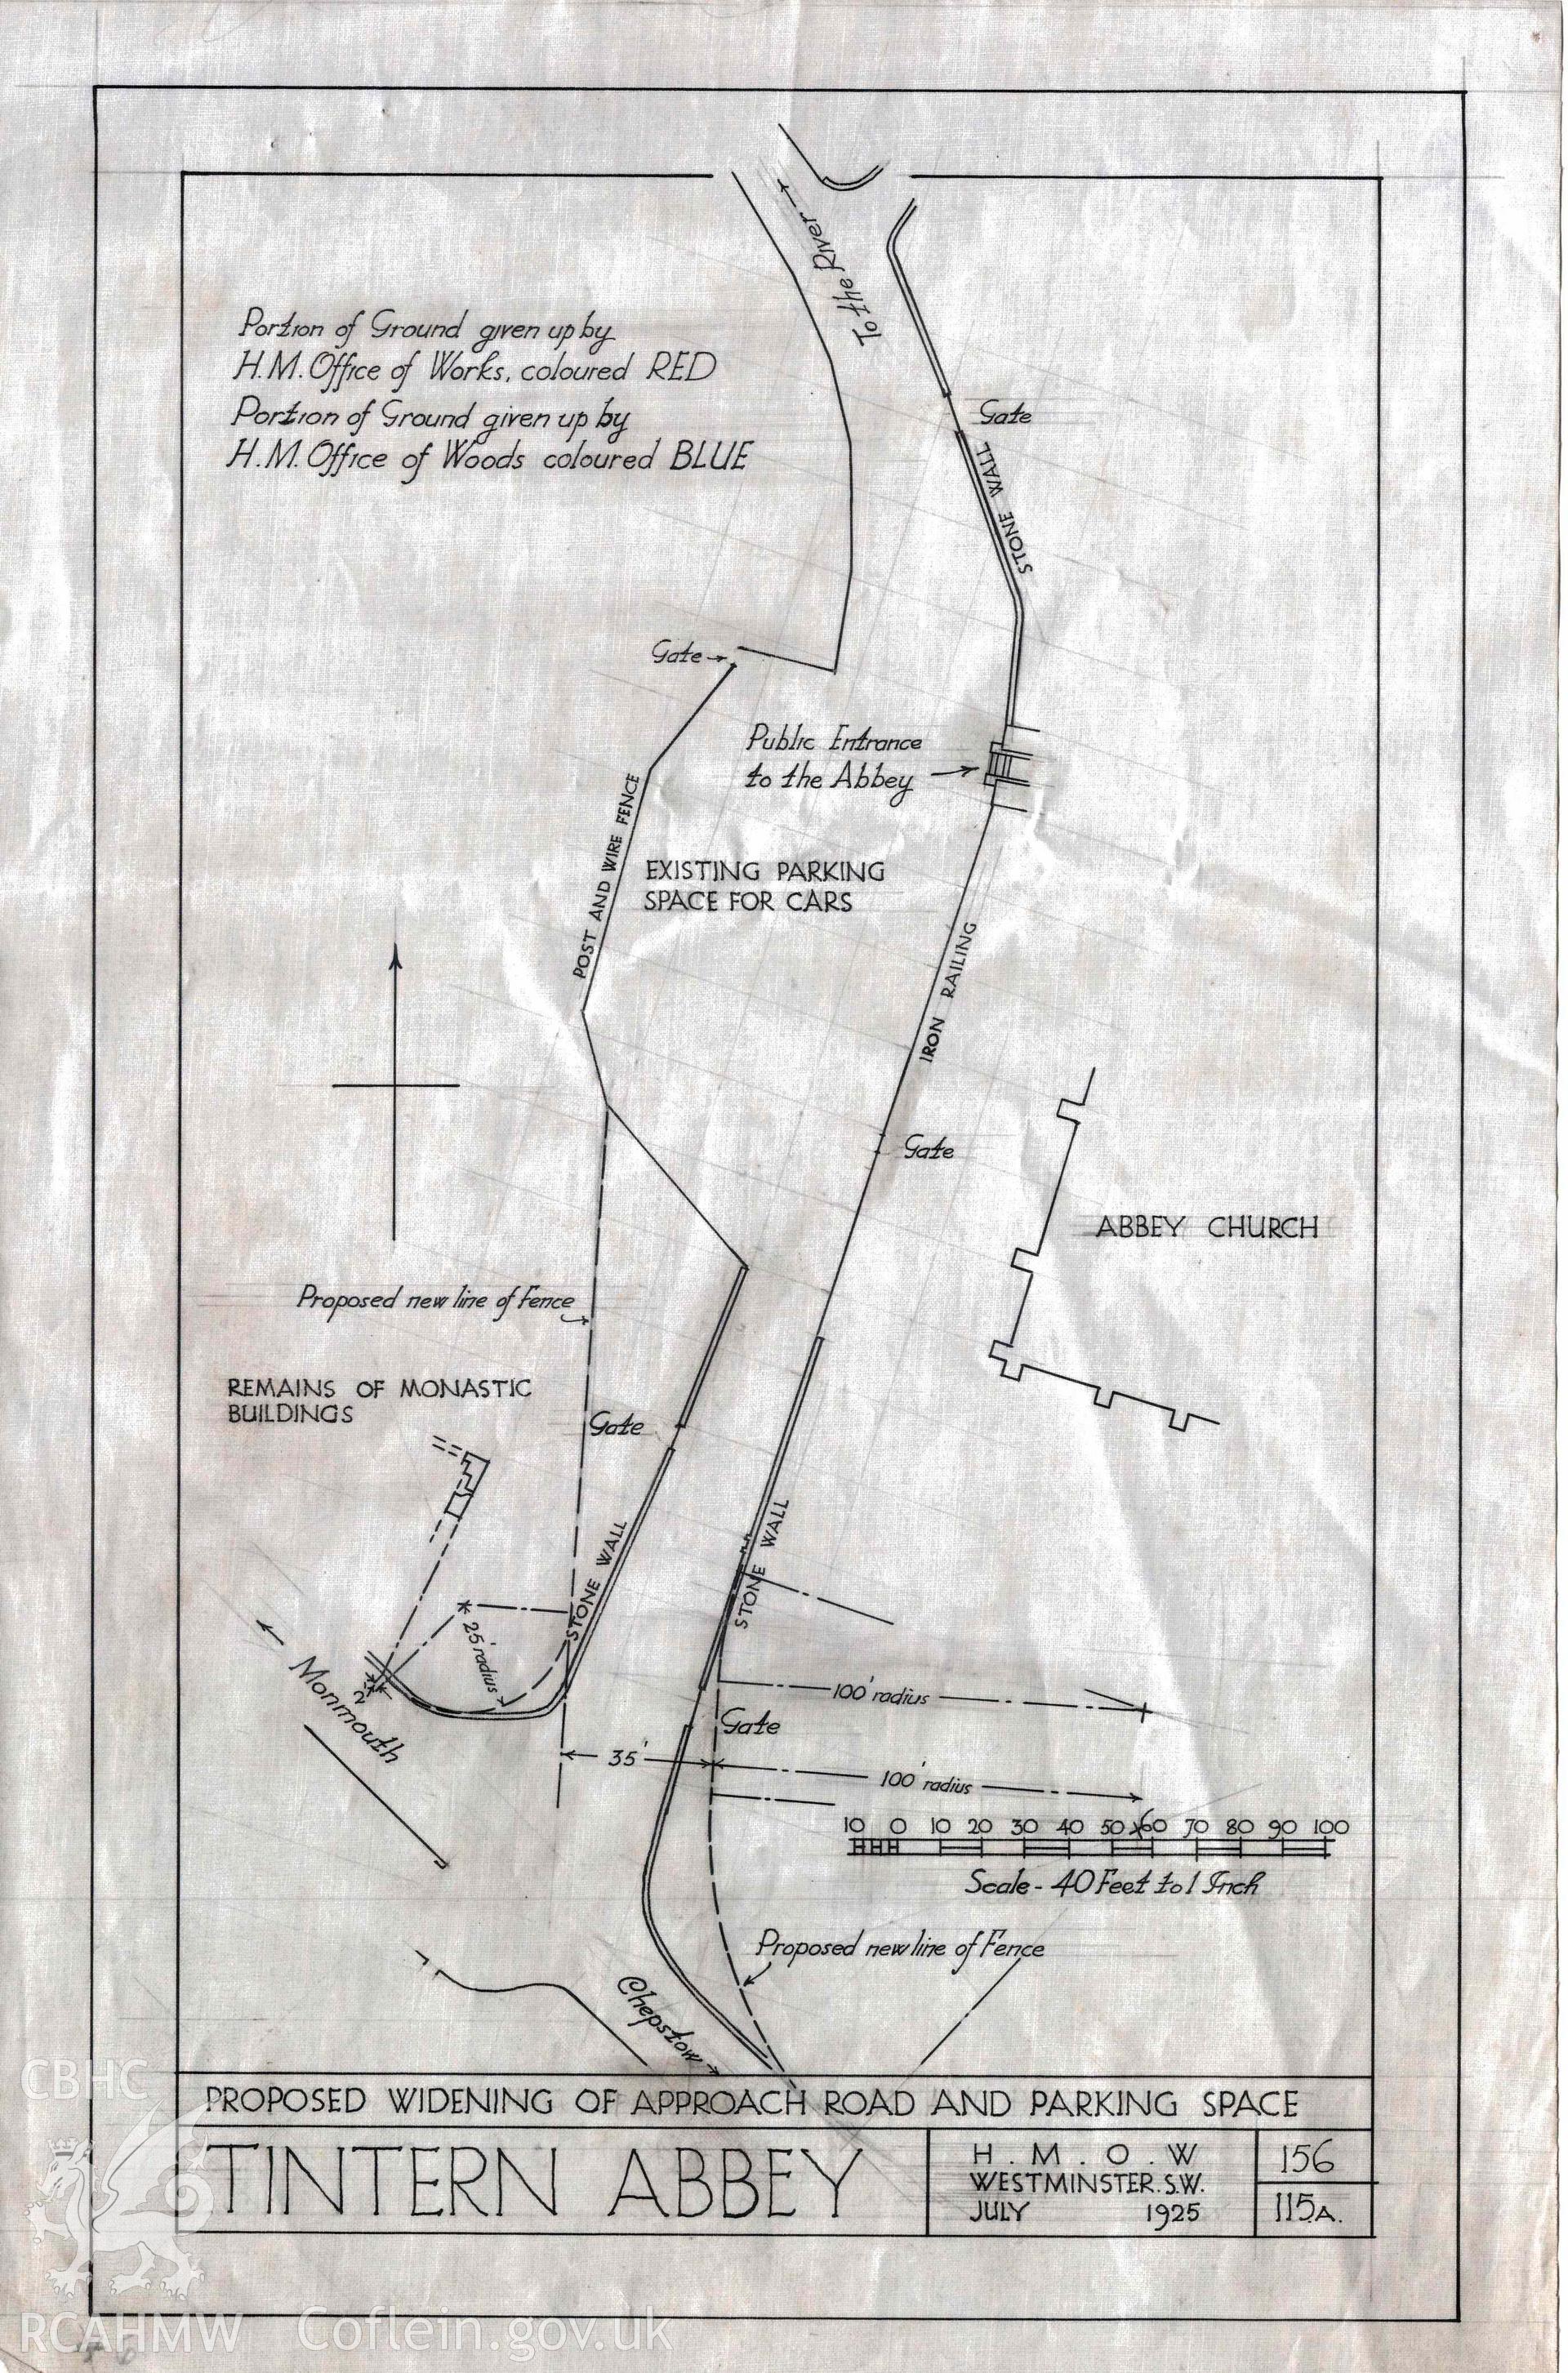 Cadw guardianship monument drawing, plan of proposed widening of approach road and parking space, Tintern Abbey. Dated July 1925.